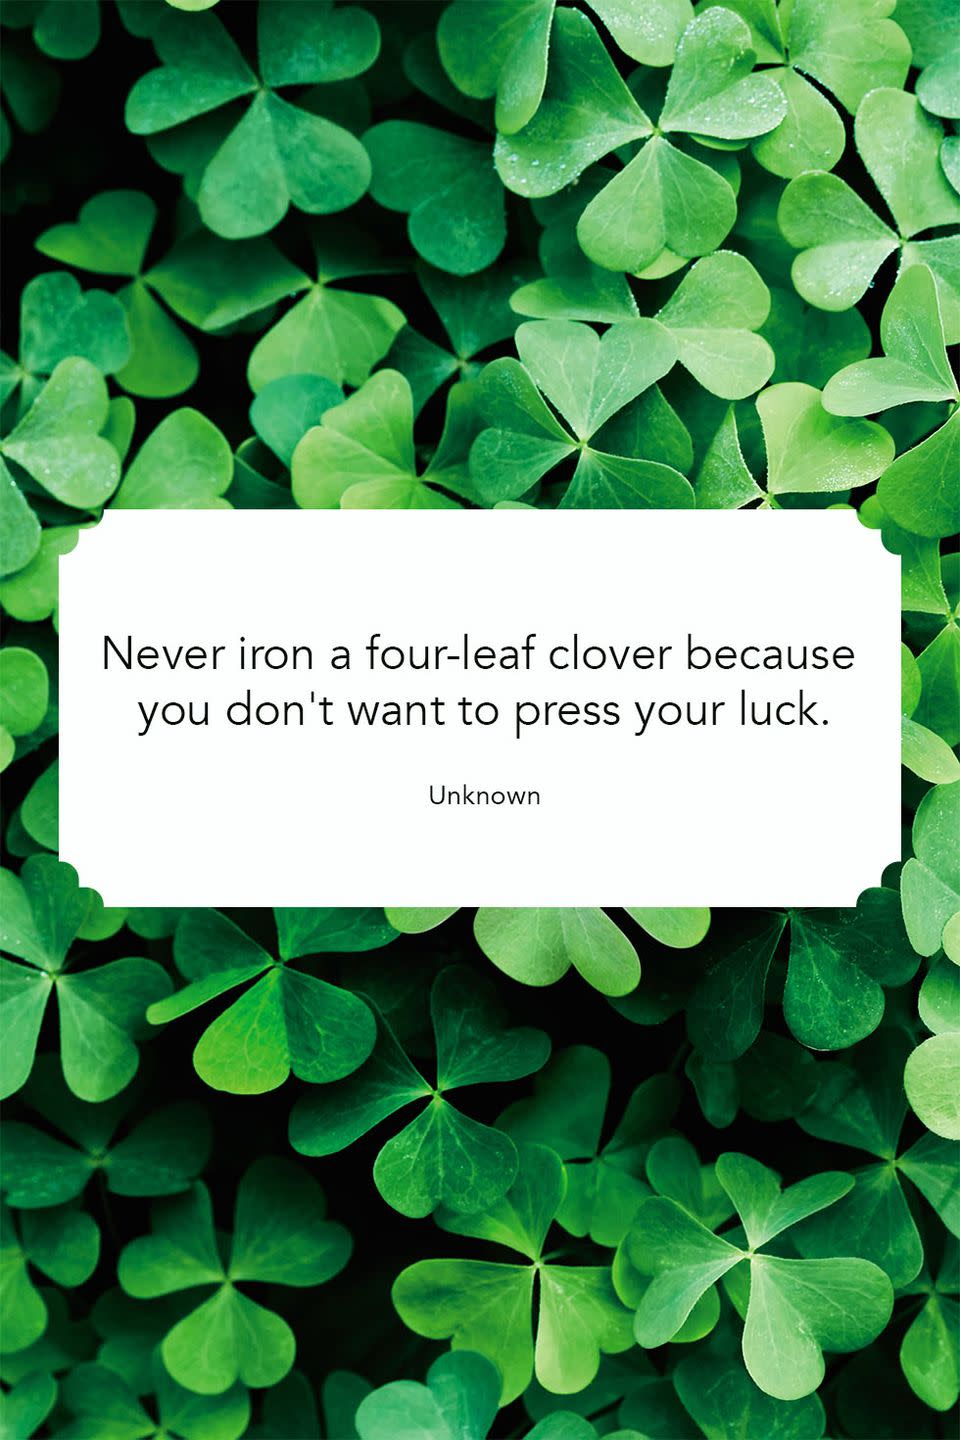 <p>"Never iron a four-leaf clover because you don't want to press your luck."</p>